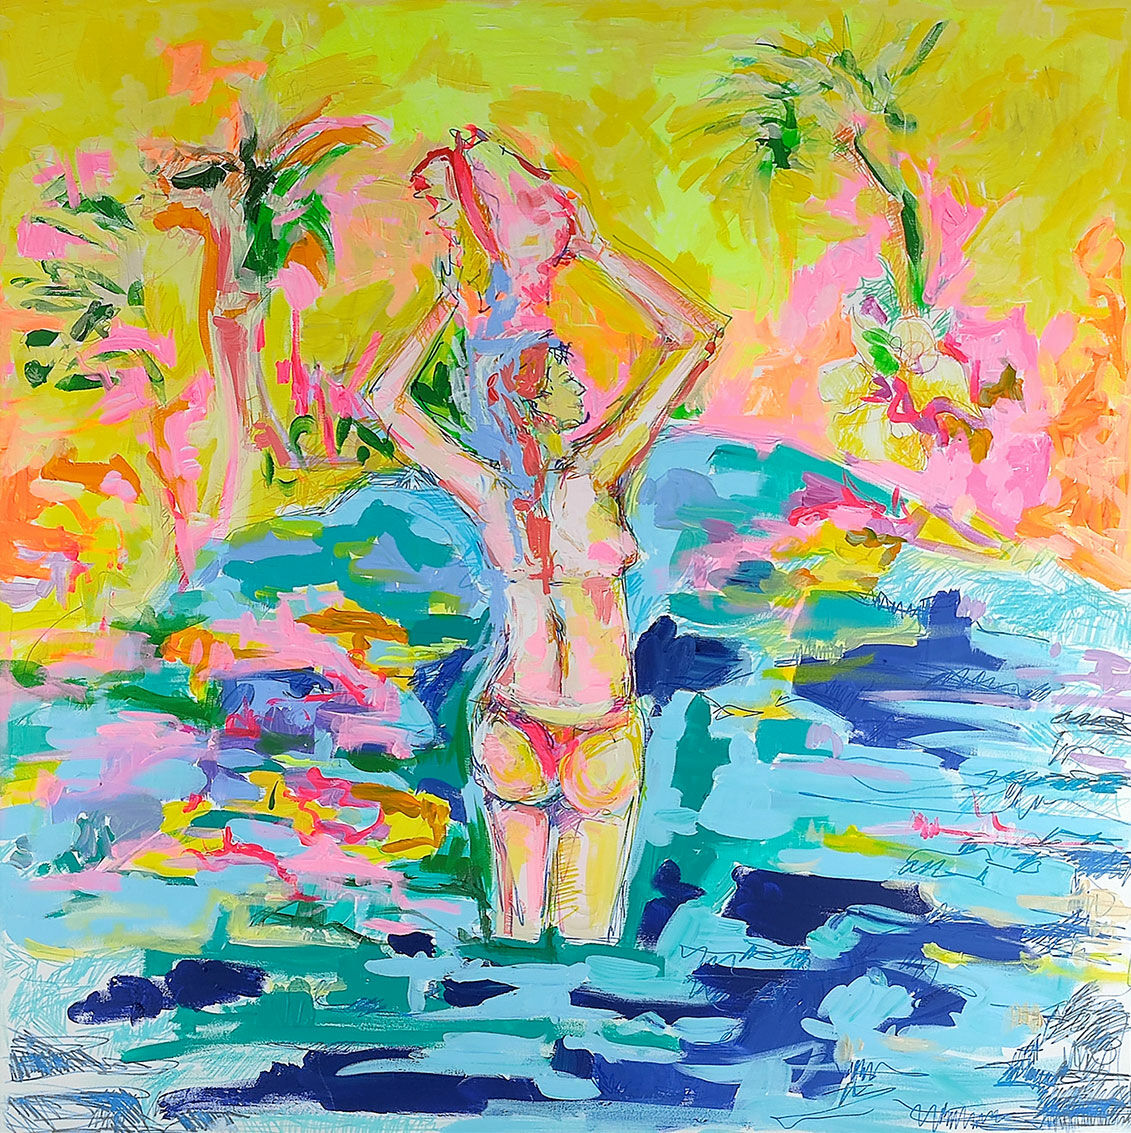 Picture "Woman at the Beach with Shell" (2011) (Original / Unique piece), on stretcher frame by Nicole Leidenfrost